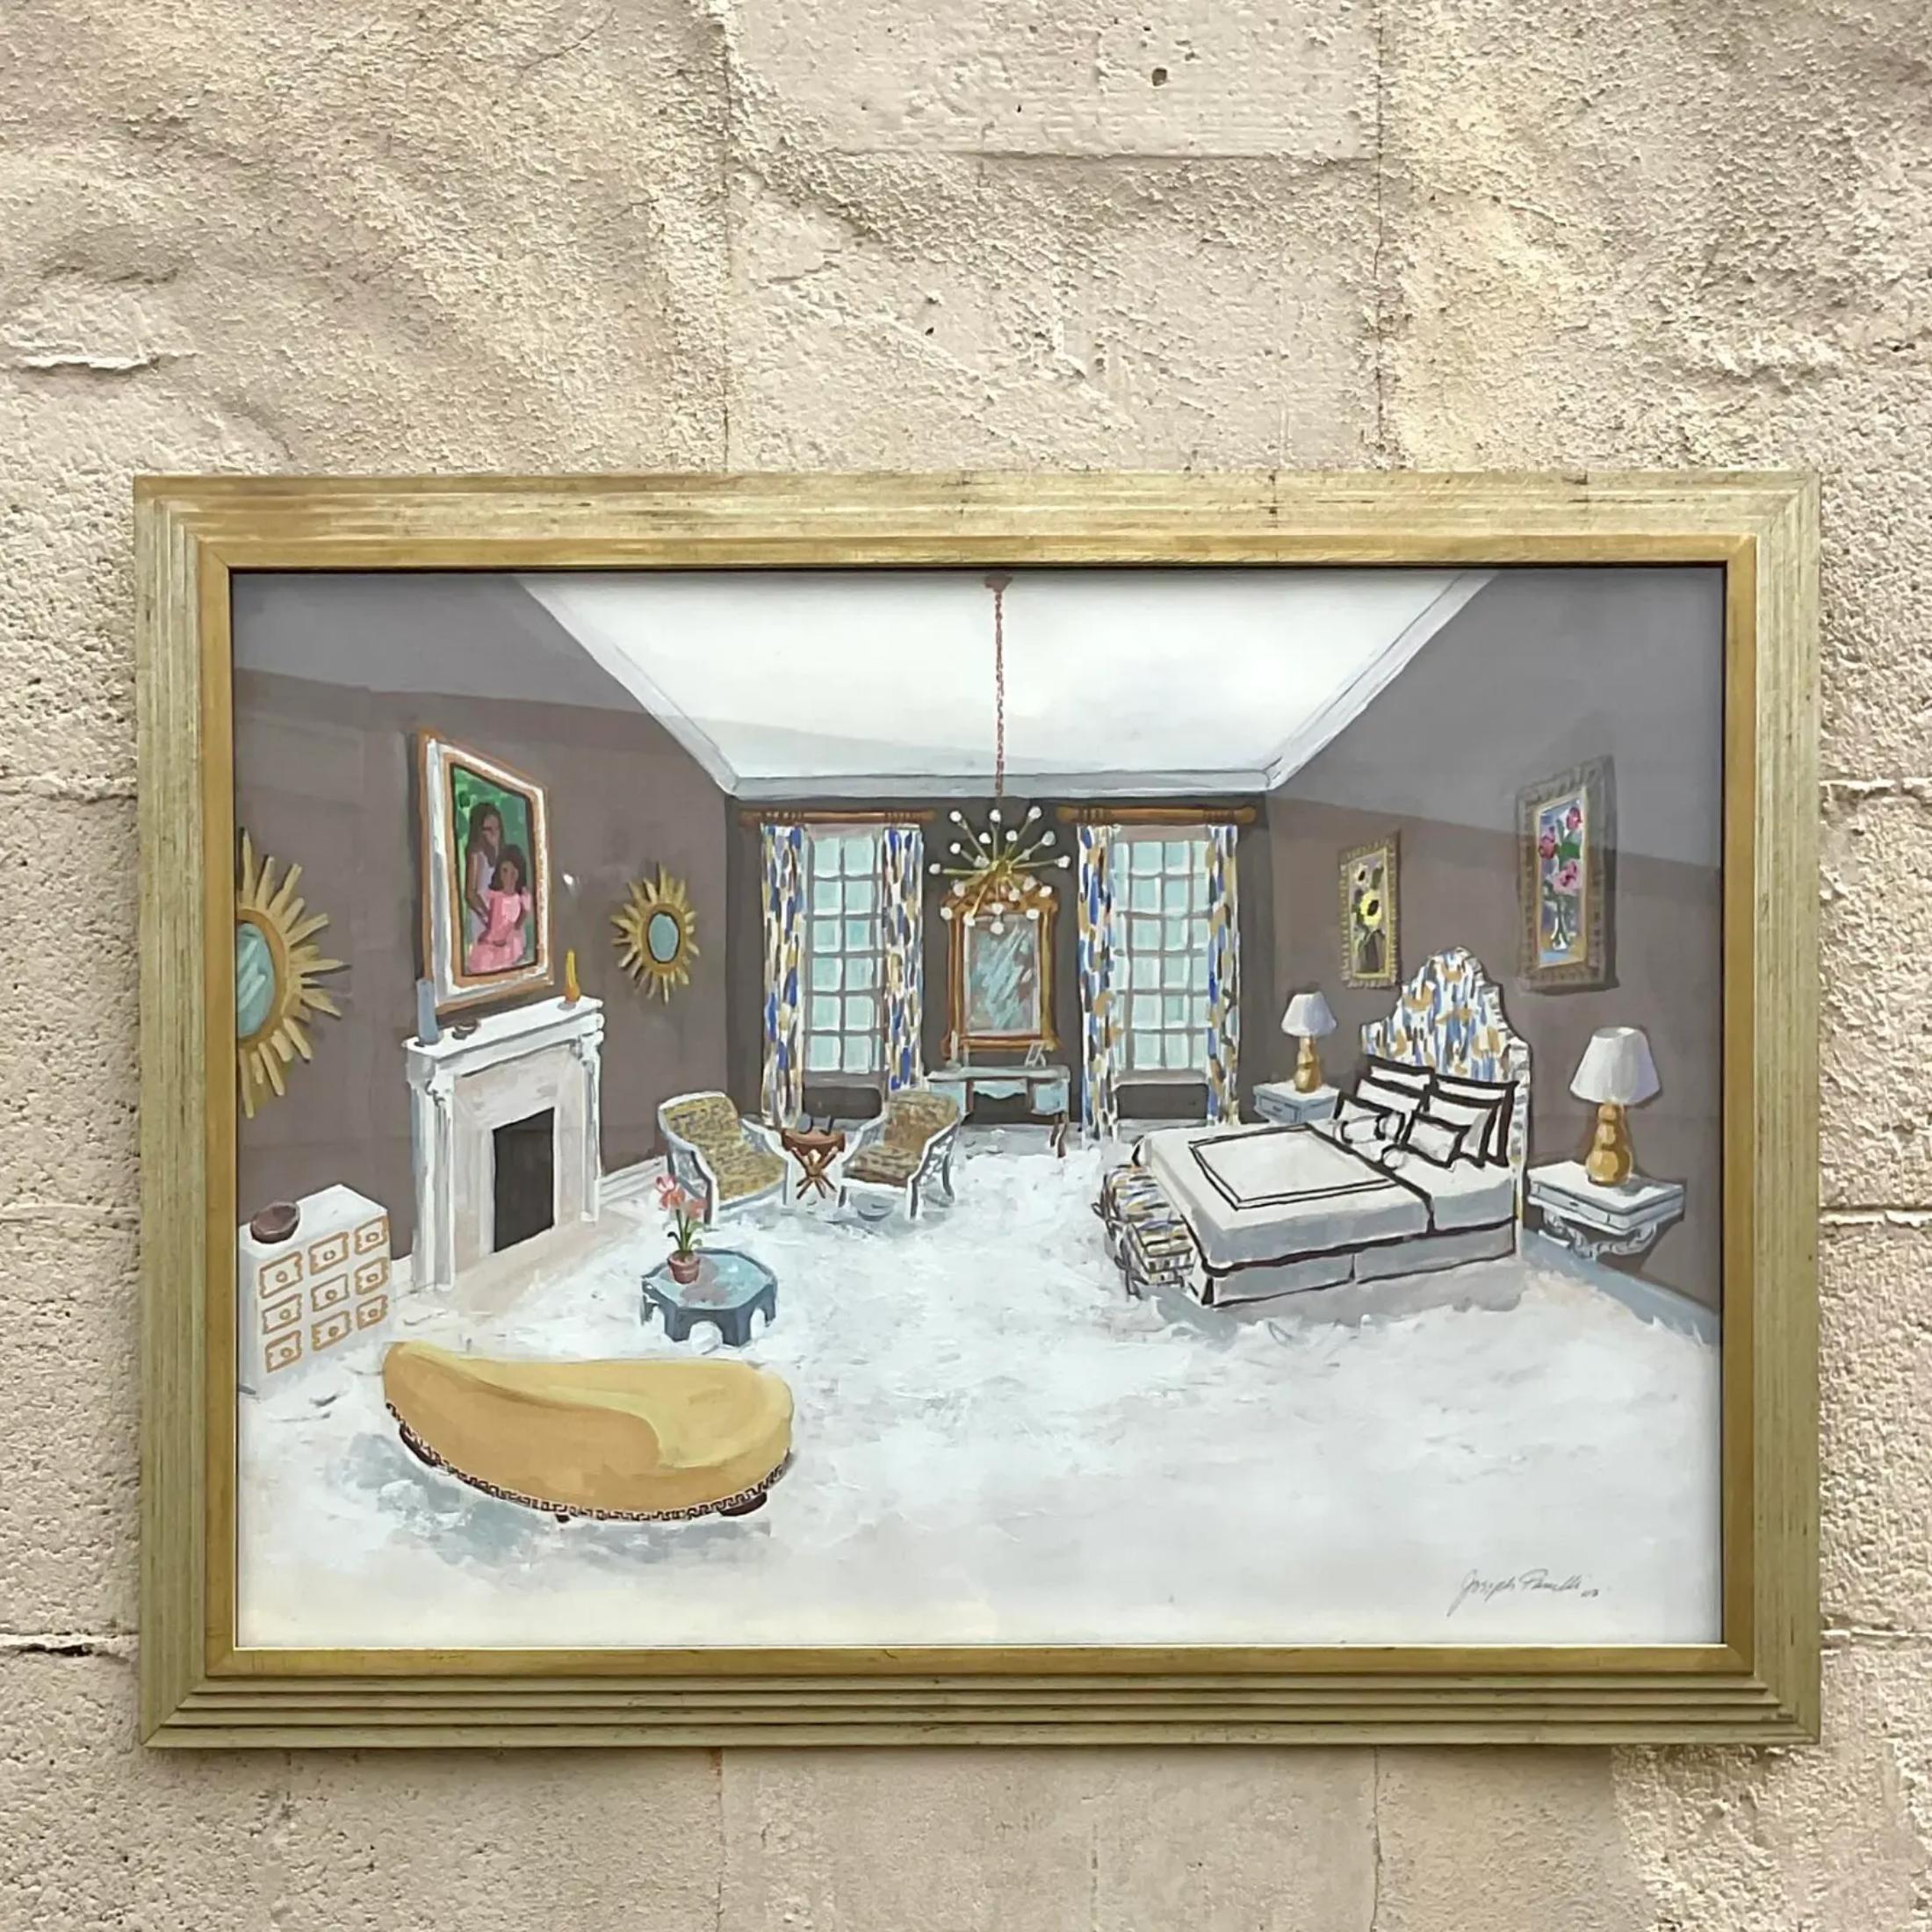 A fabulous vintage Original oil painting on paper. A chic interiors composition in clear colors. A glamorous bedroom scene in a gilt frame. Acquired from a Palm Beach estate